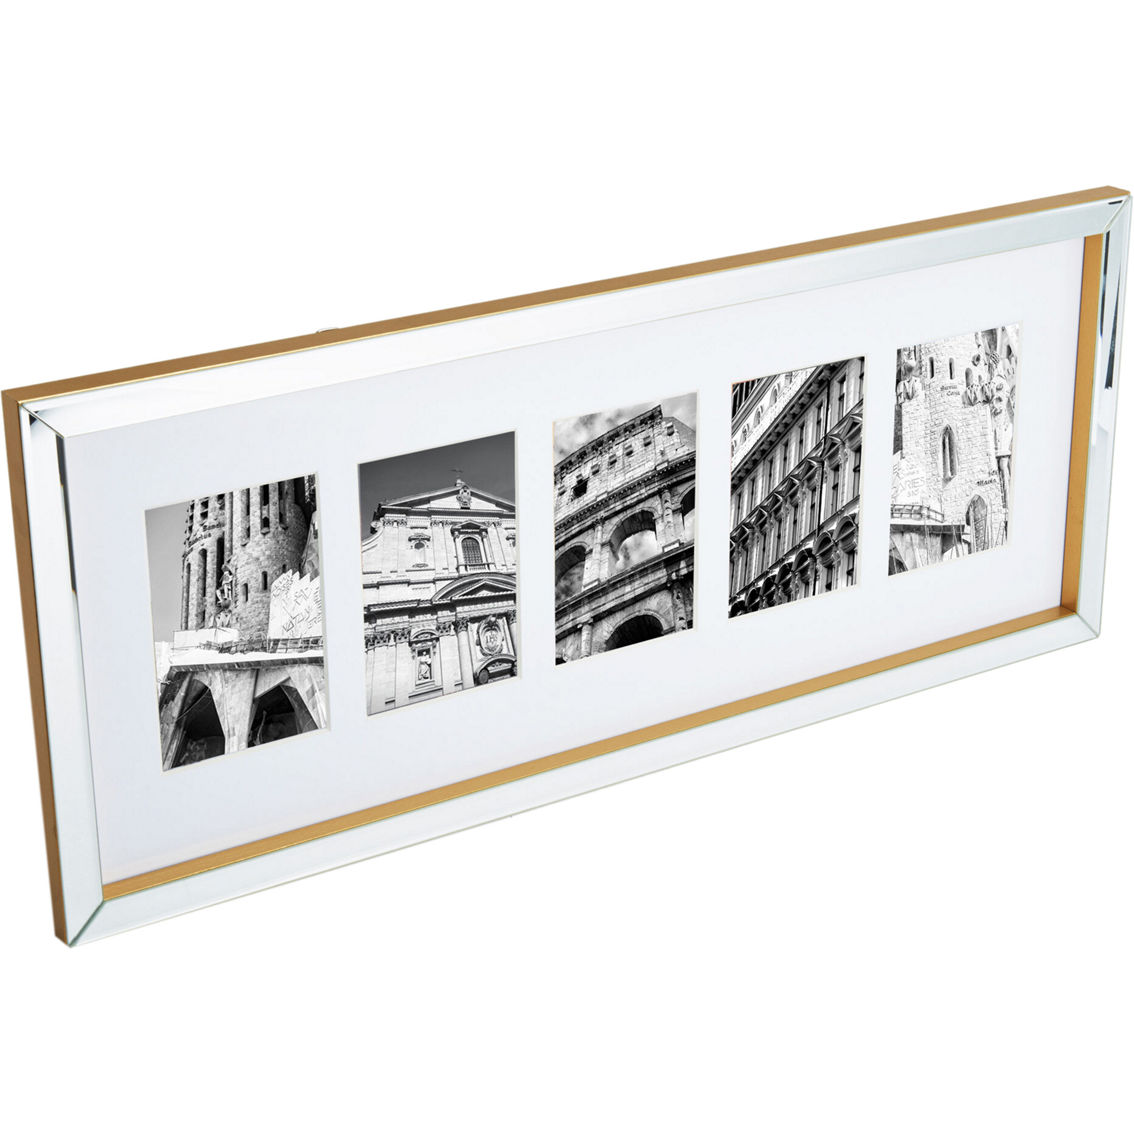 Mikasa Home 11 x 27 in. 5 Opening Mirror Gallery Collage Frame with Gold Sides - Image 2 of 7